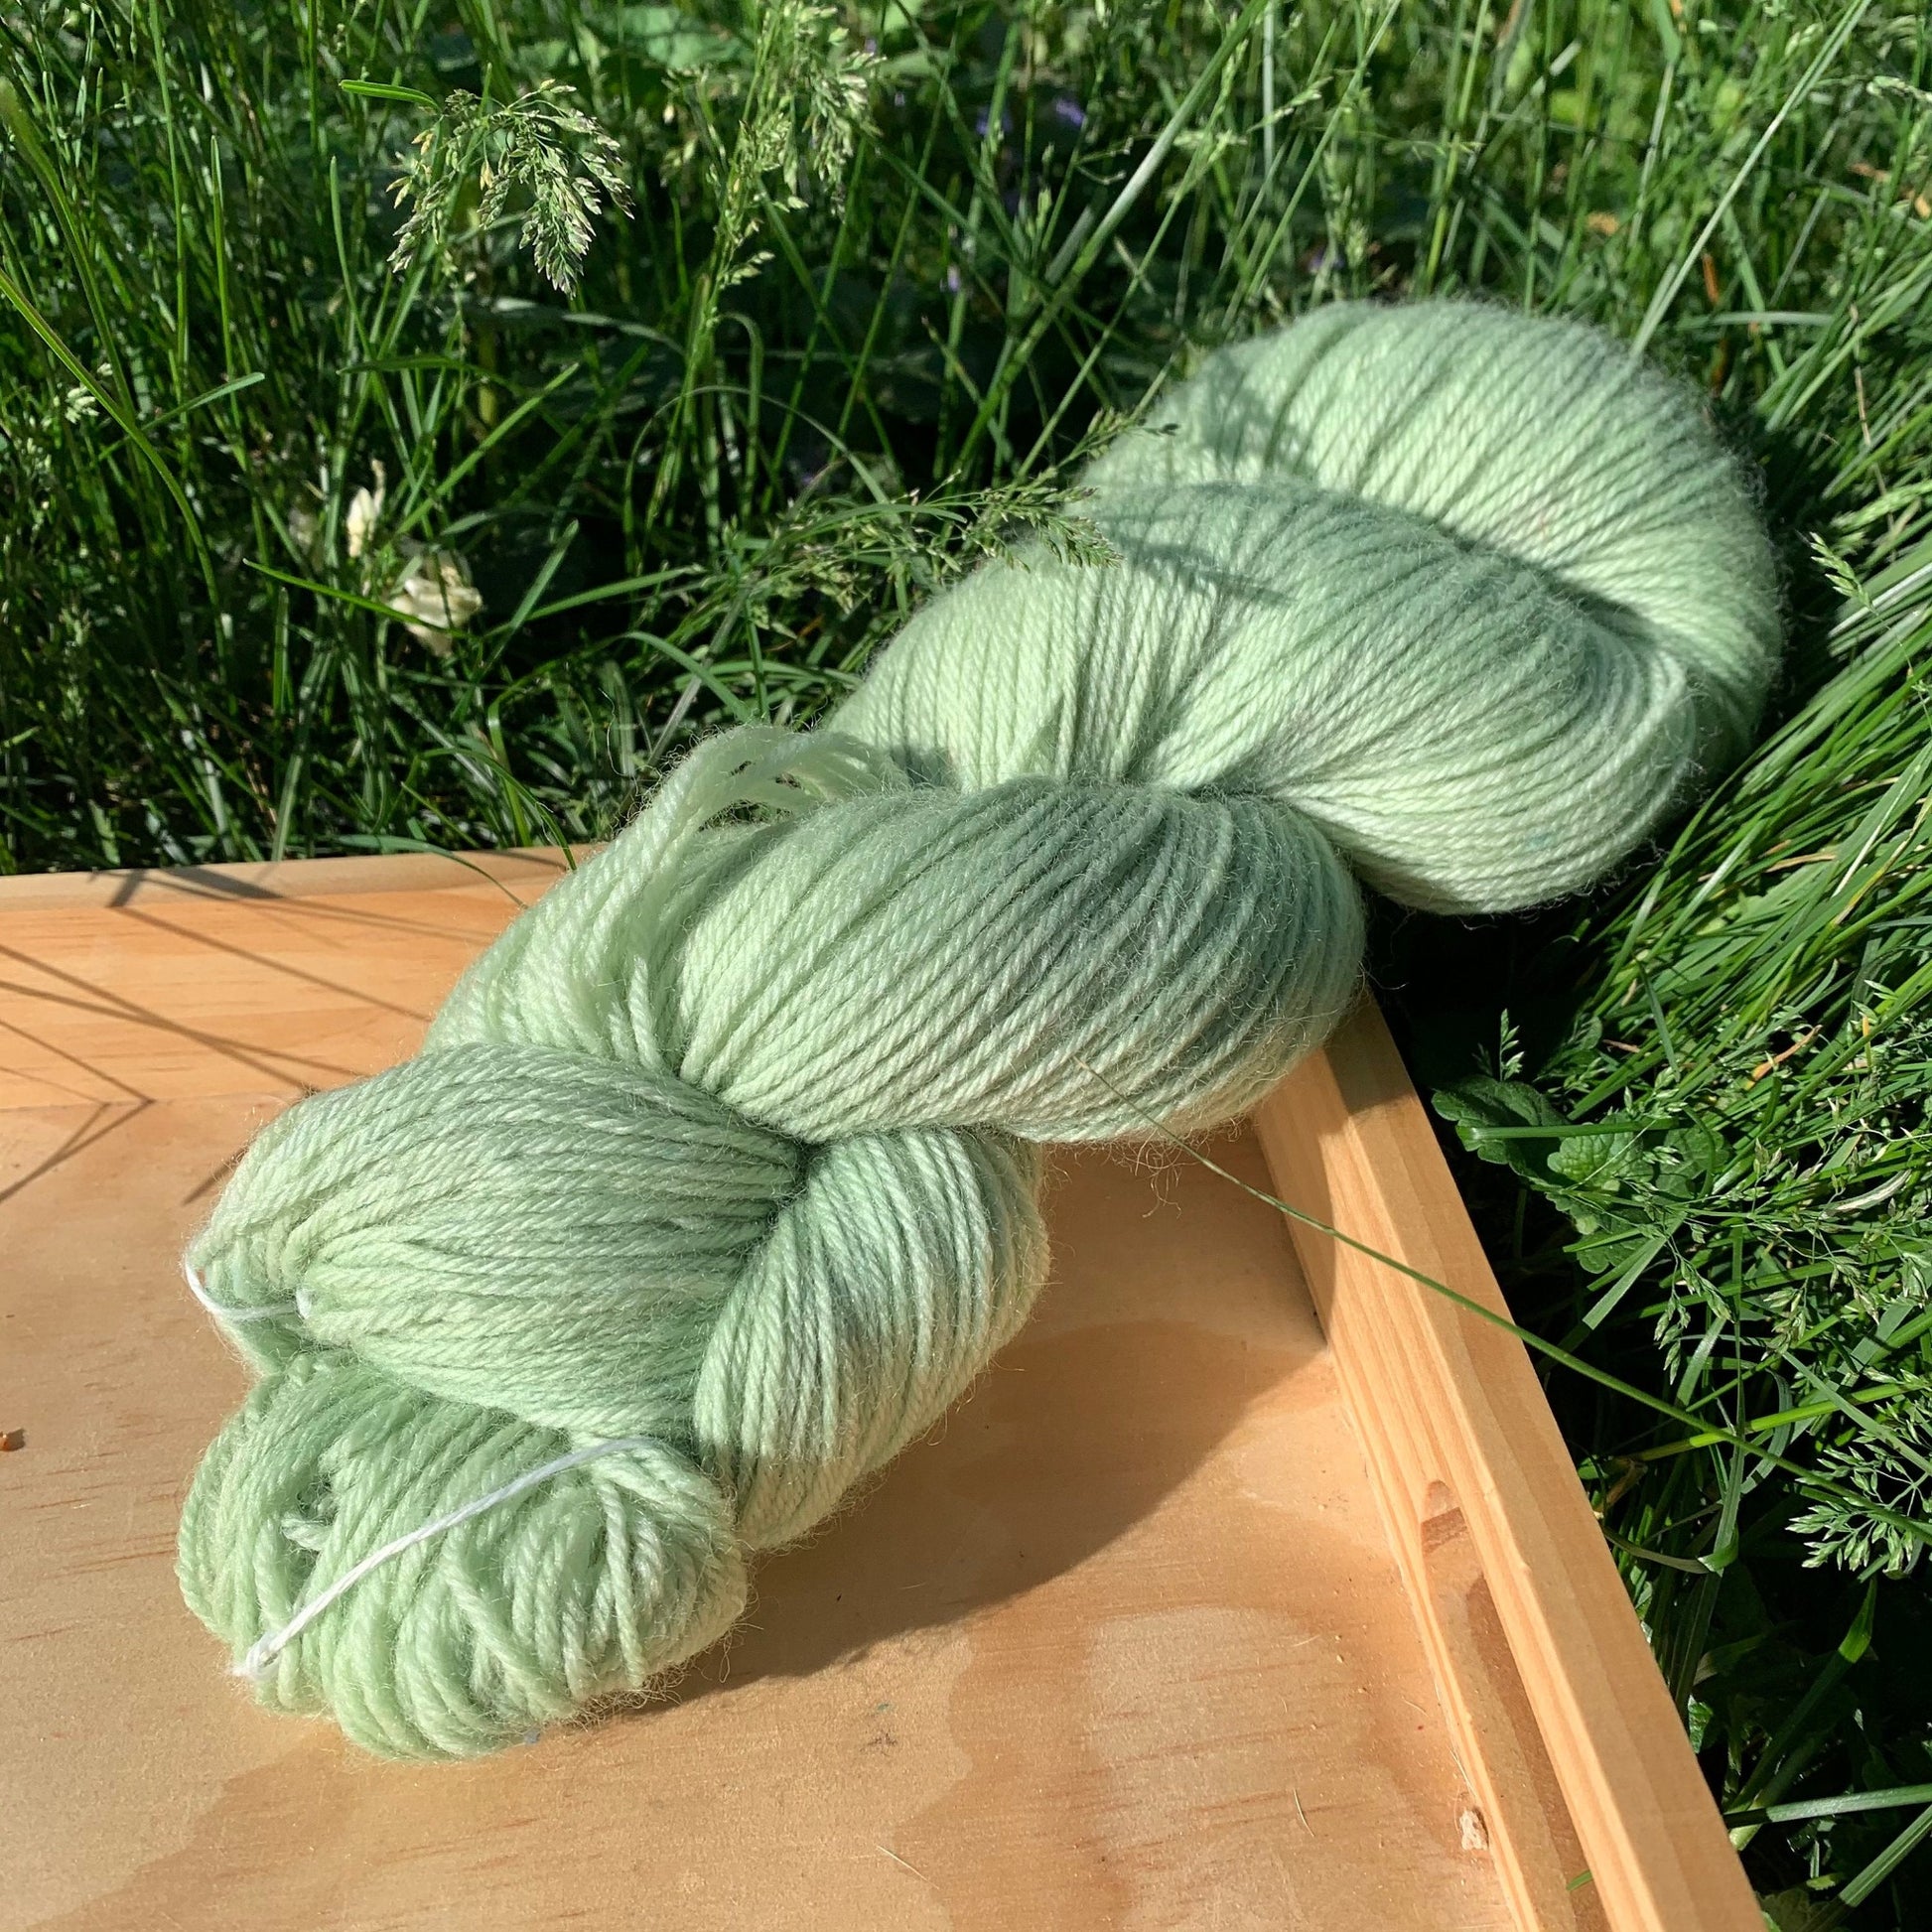 A light green skein of hand dyed yarn.